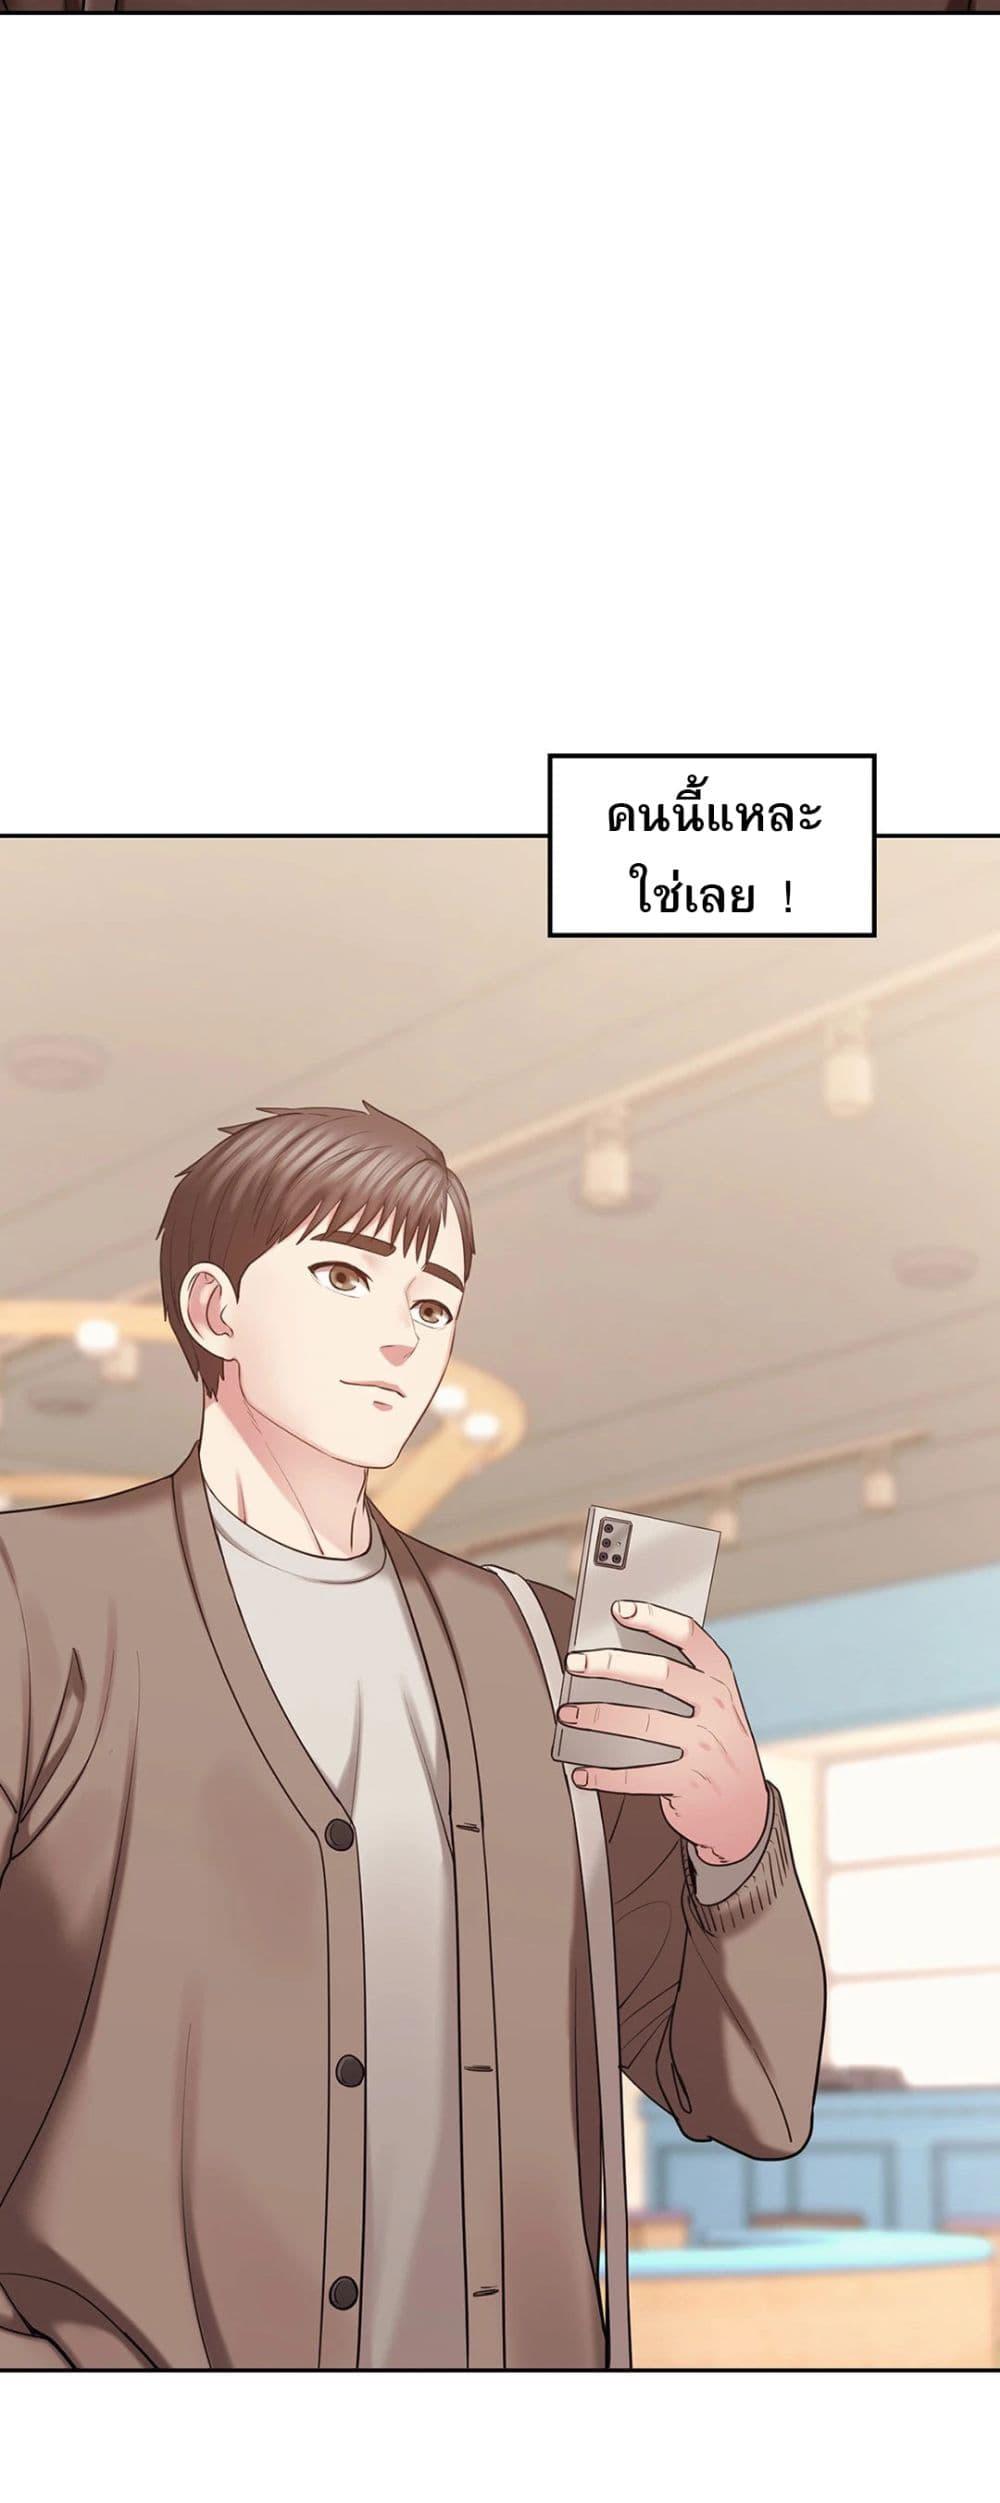 Sexual Consulting 1 ภาพ 6